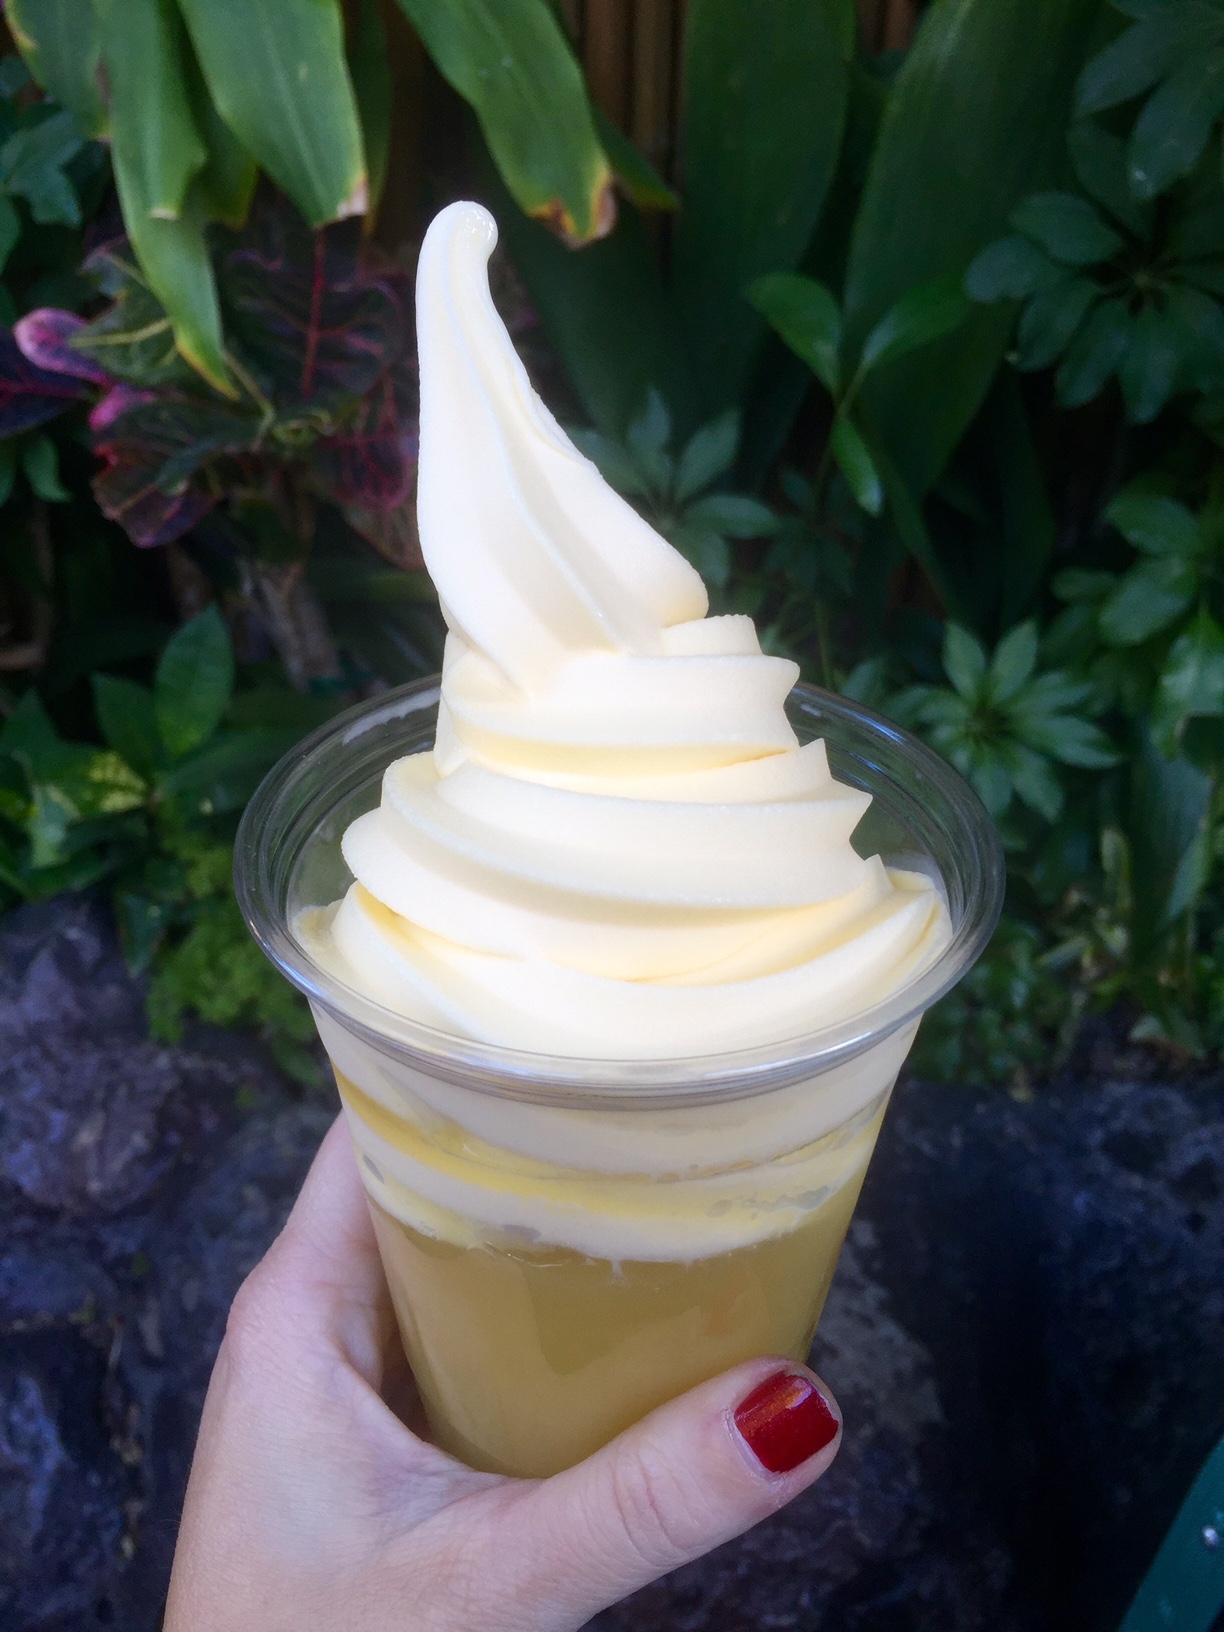 Dole Whip outside of the Tiki Room